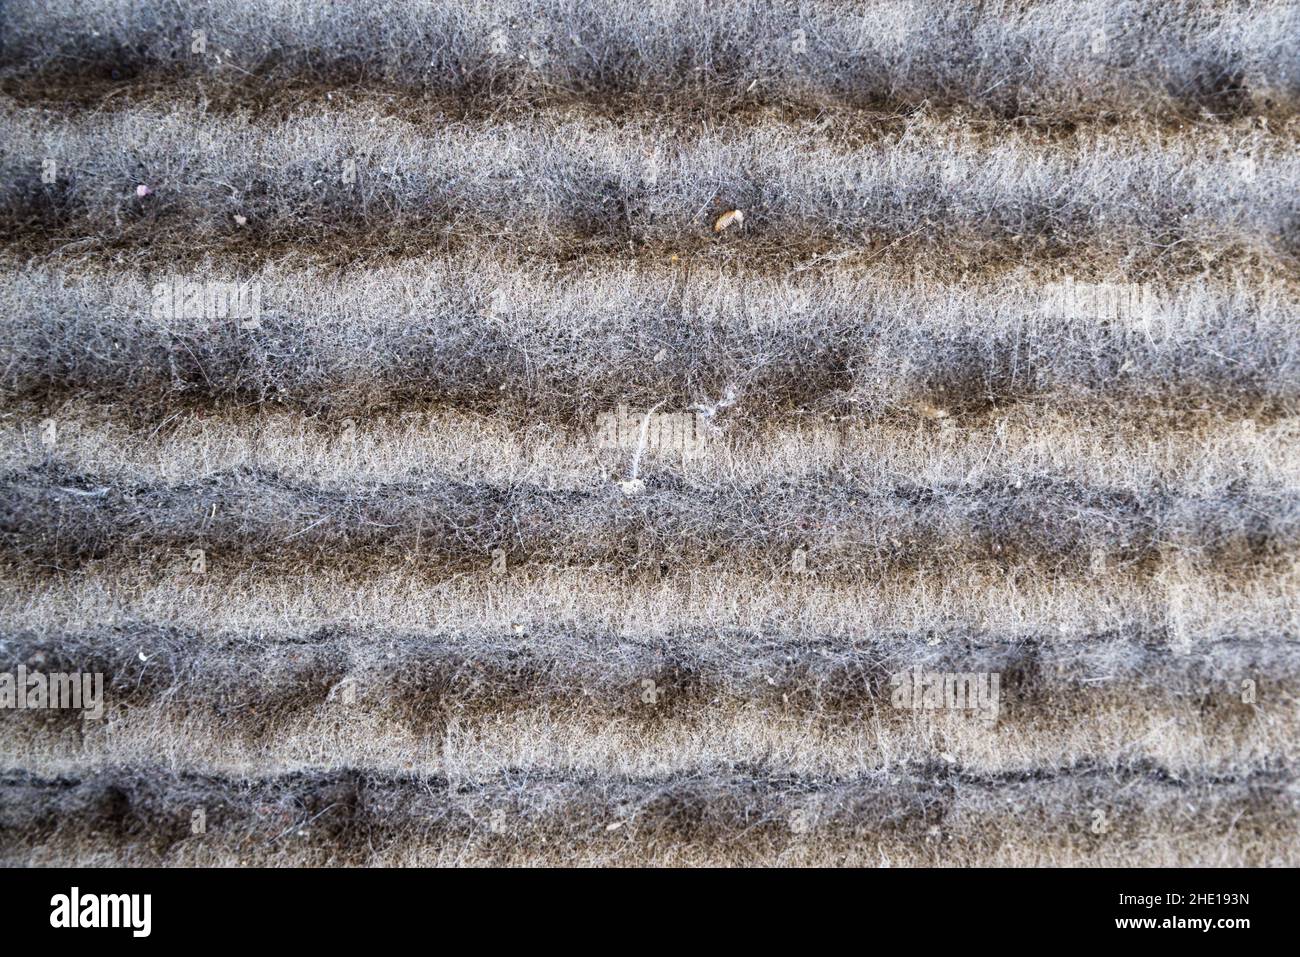 detail of a very dirty air filter clogged with hair and dust Stock Photo